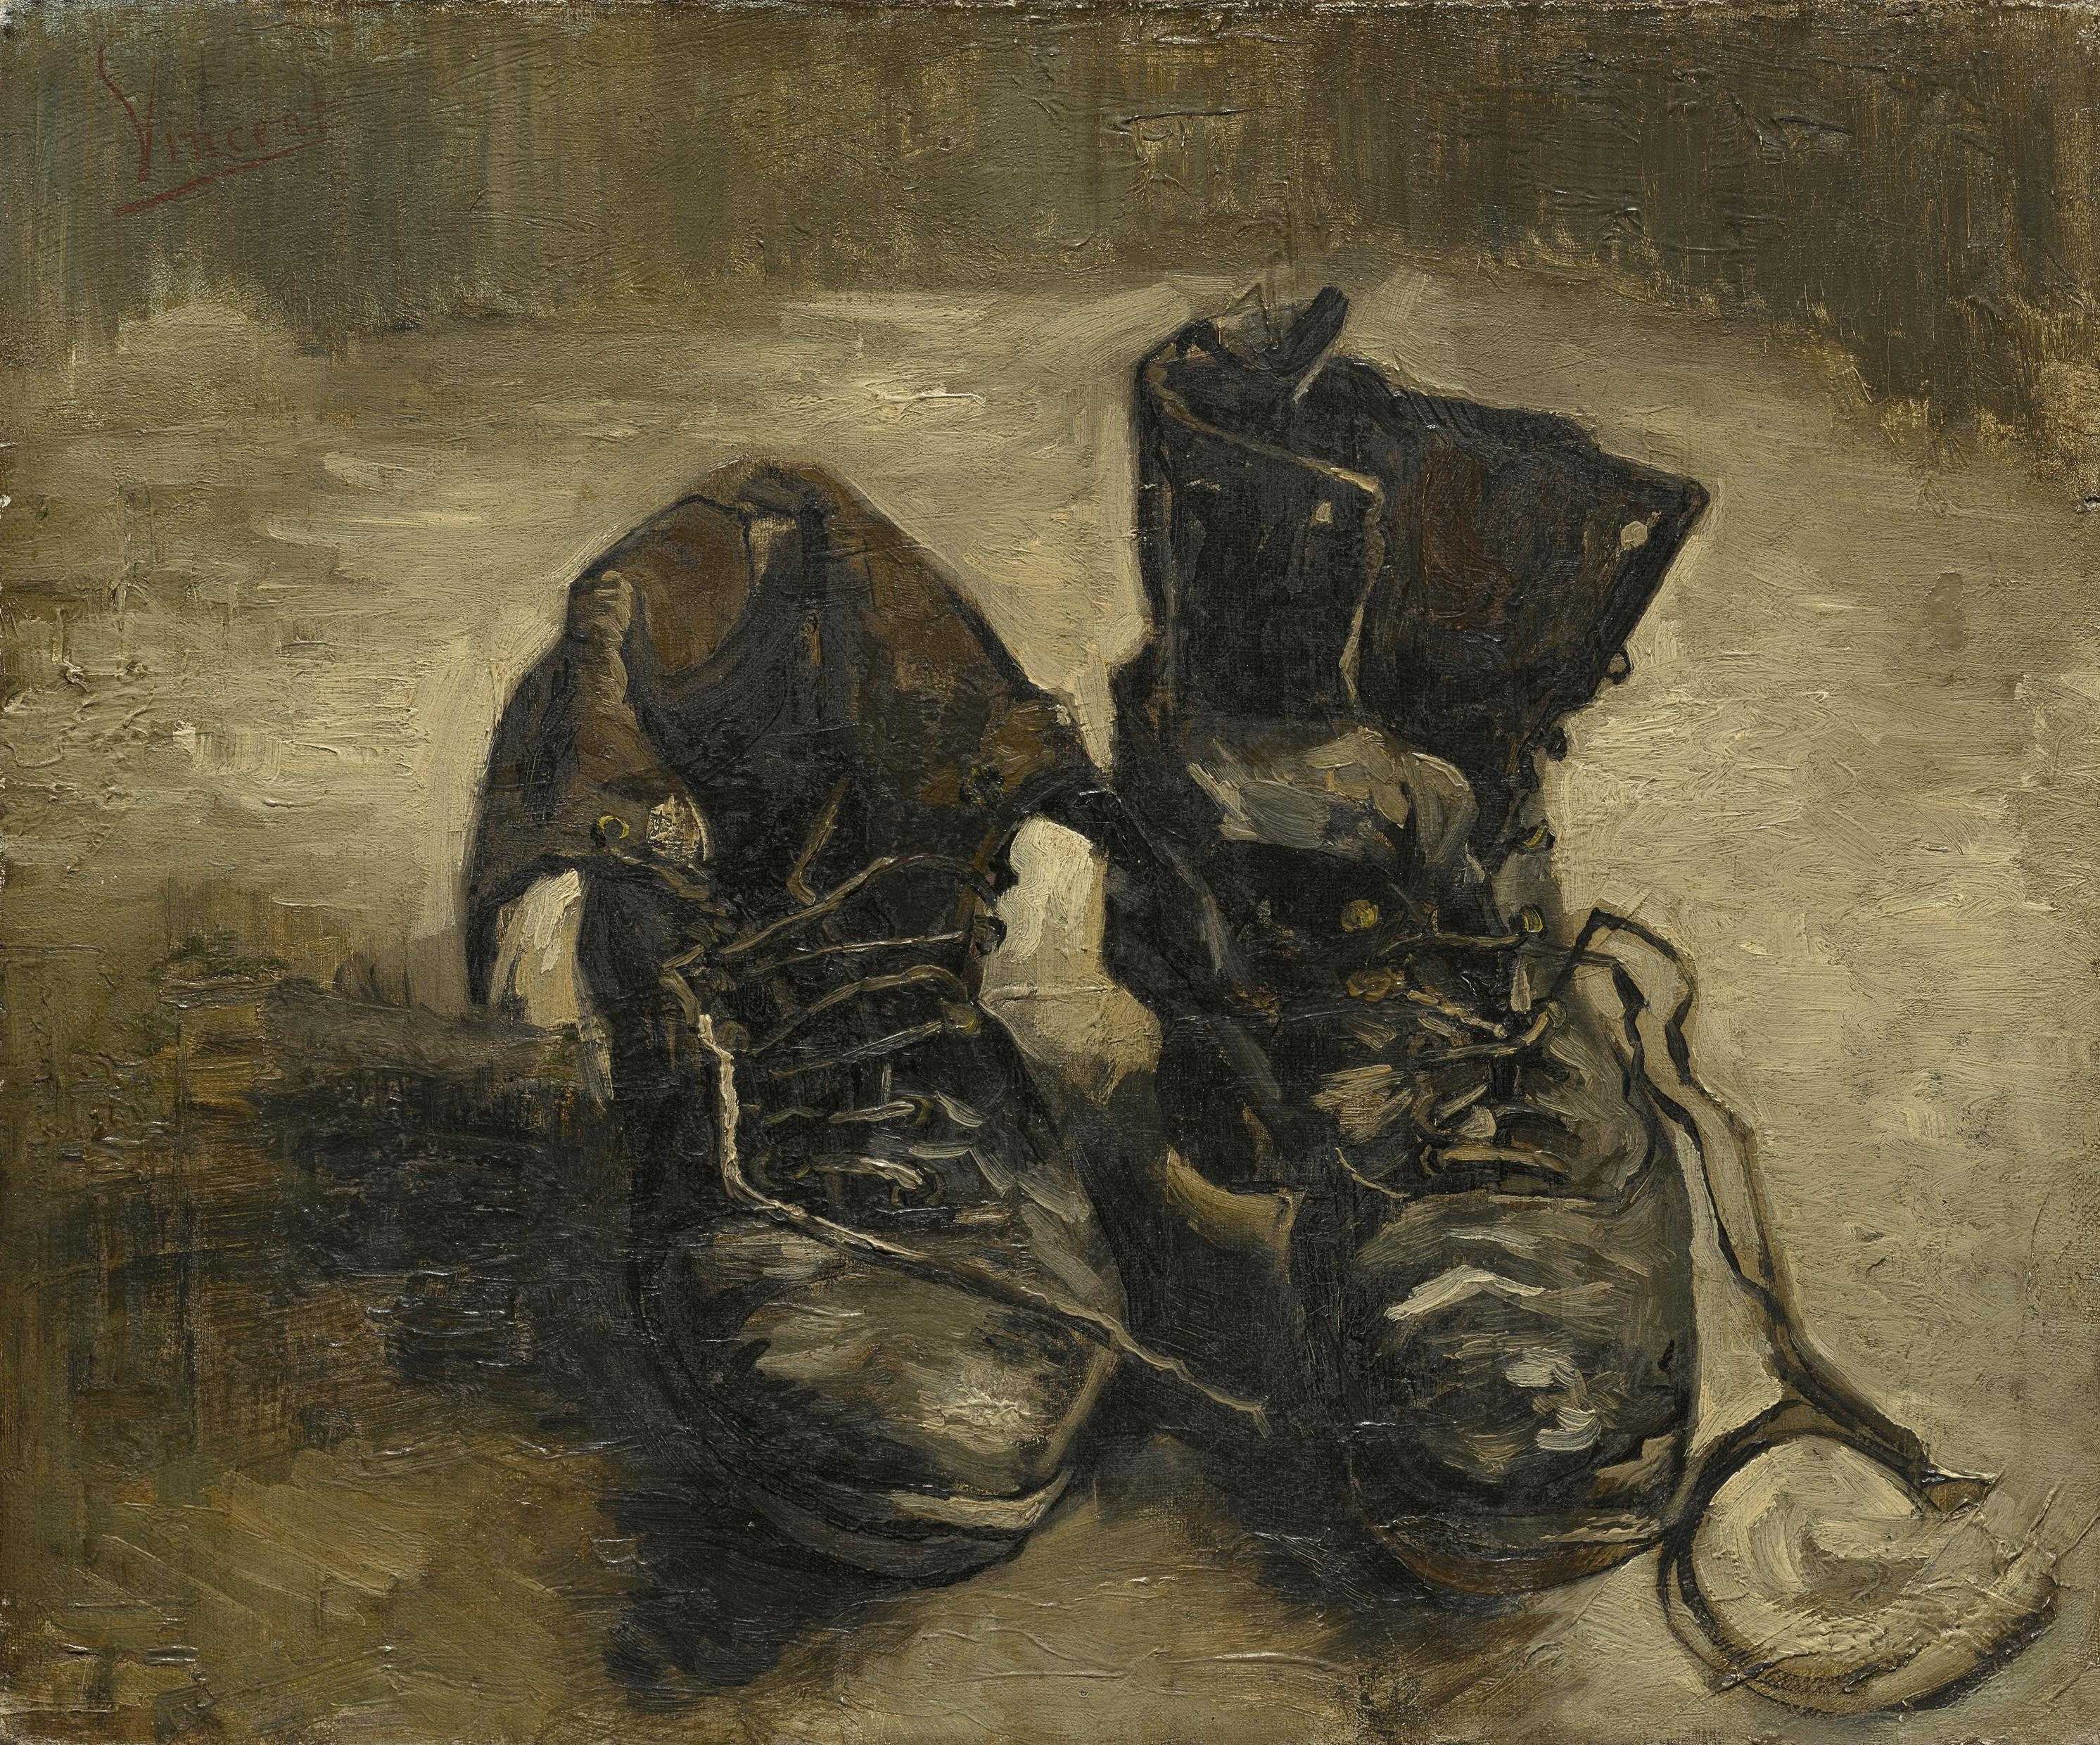 Van Gogh and Britain, Exhibition, Tate Britain, London: 27 March 2019 - 11 August 2019